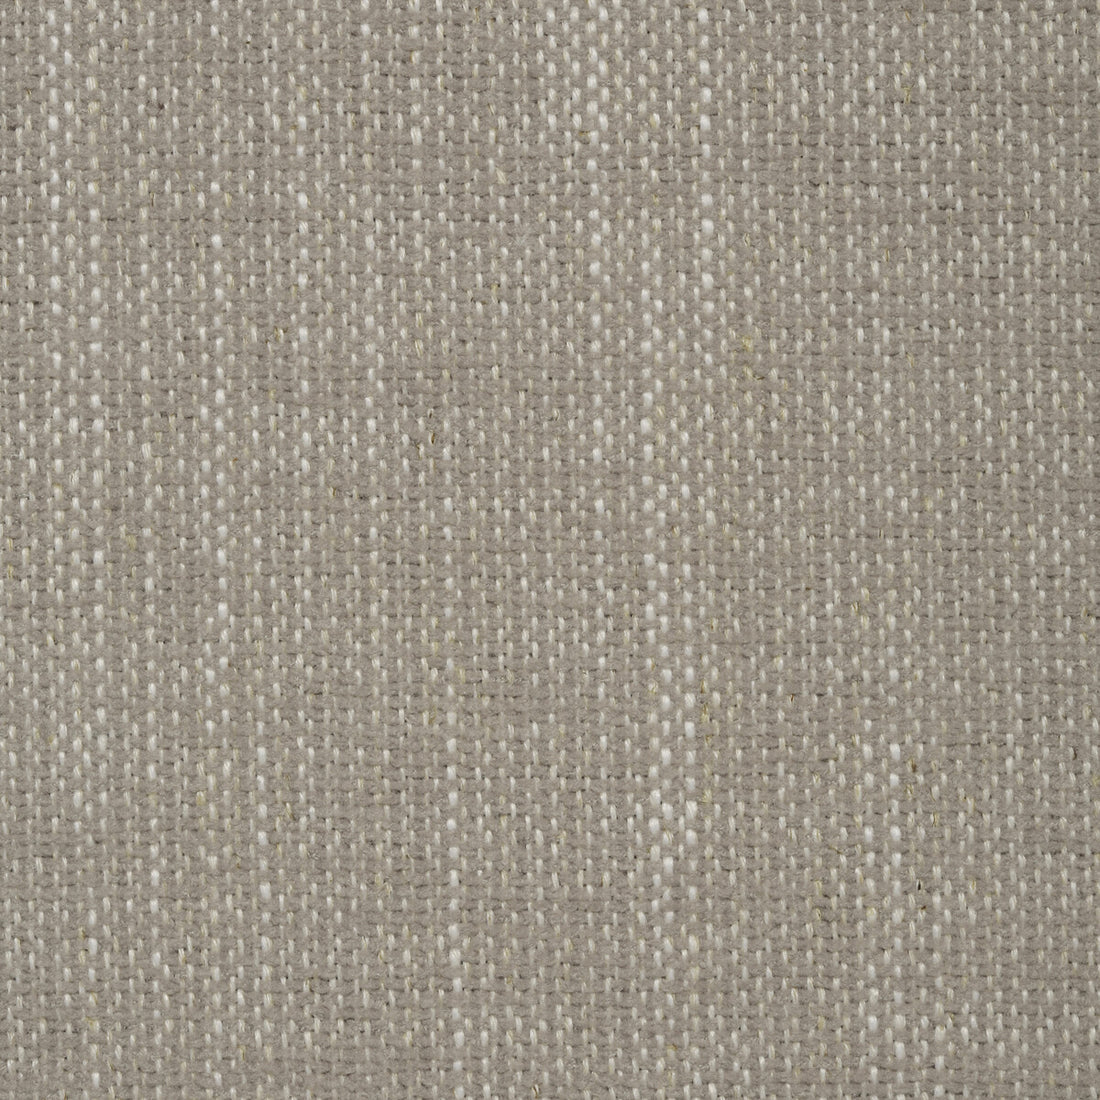 Kravet Smart fabric in 35111-1610 color - pattern 35111.1610.0 - by Kravet Smart in the Performance Crypton Home collection